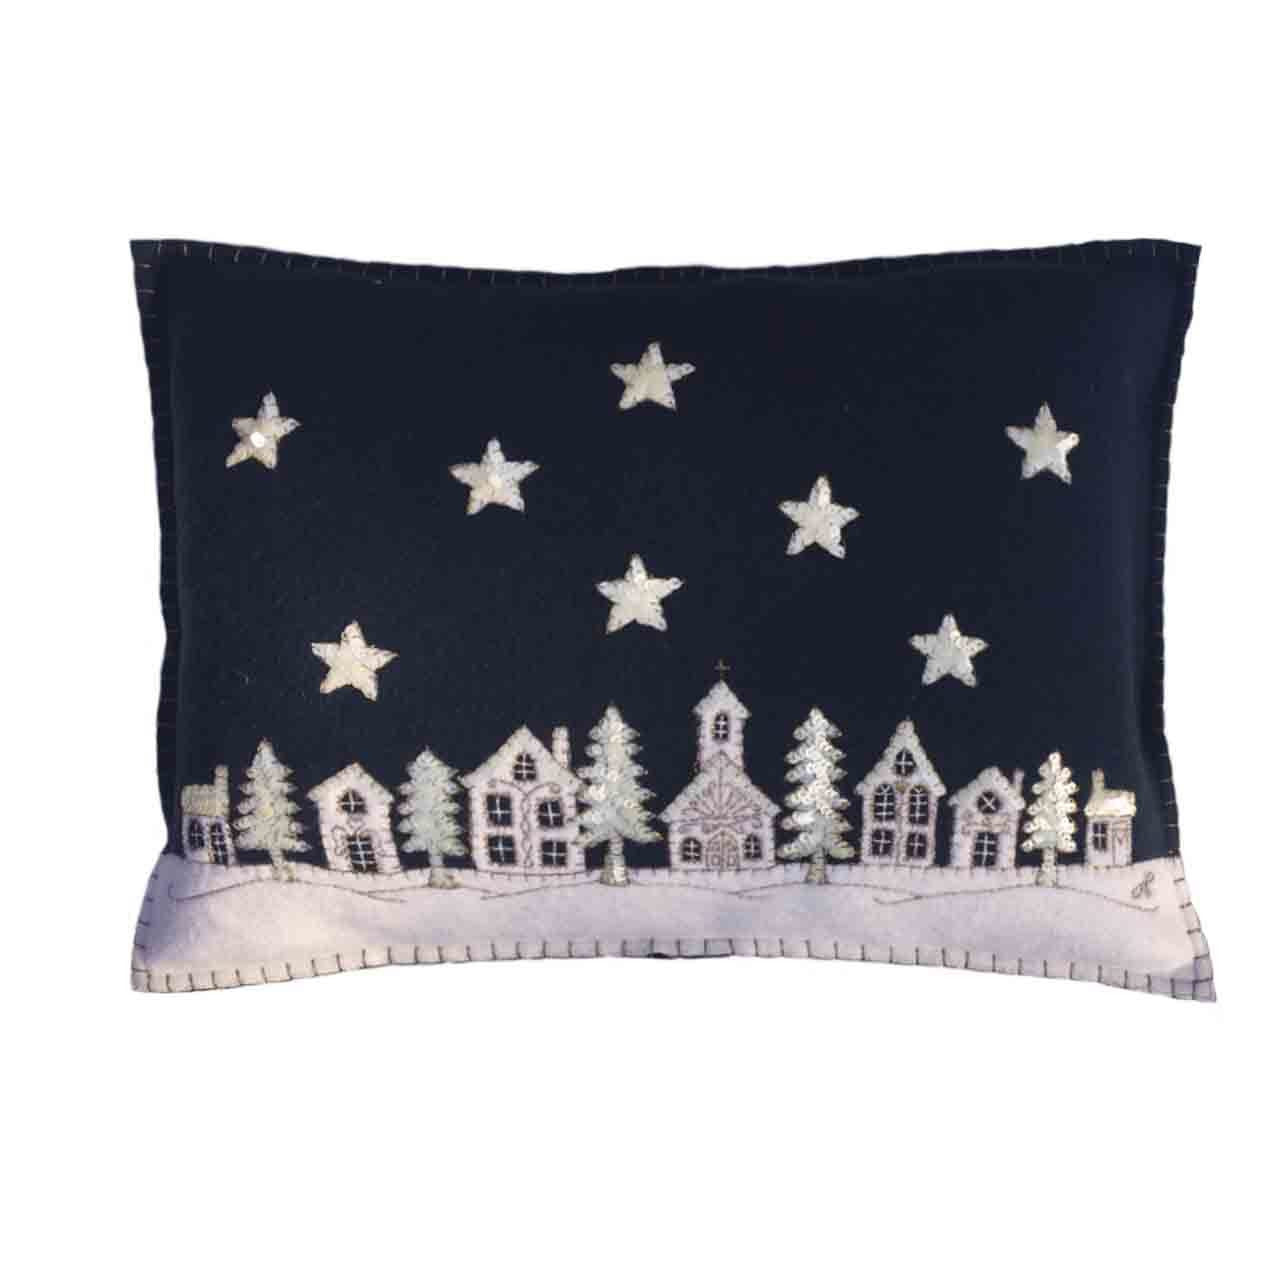 Jan Constantine Starry Night hand-embroidered cushion.